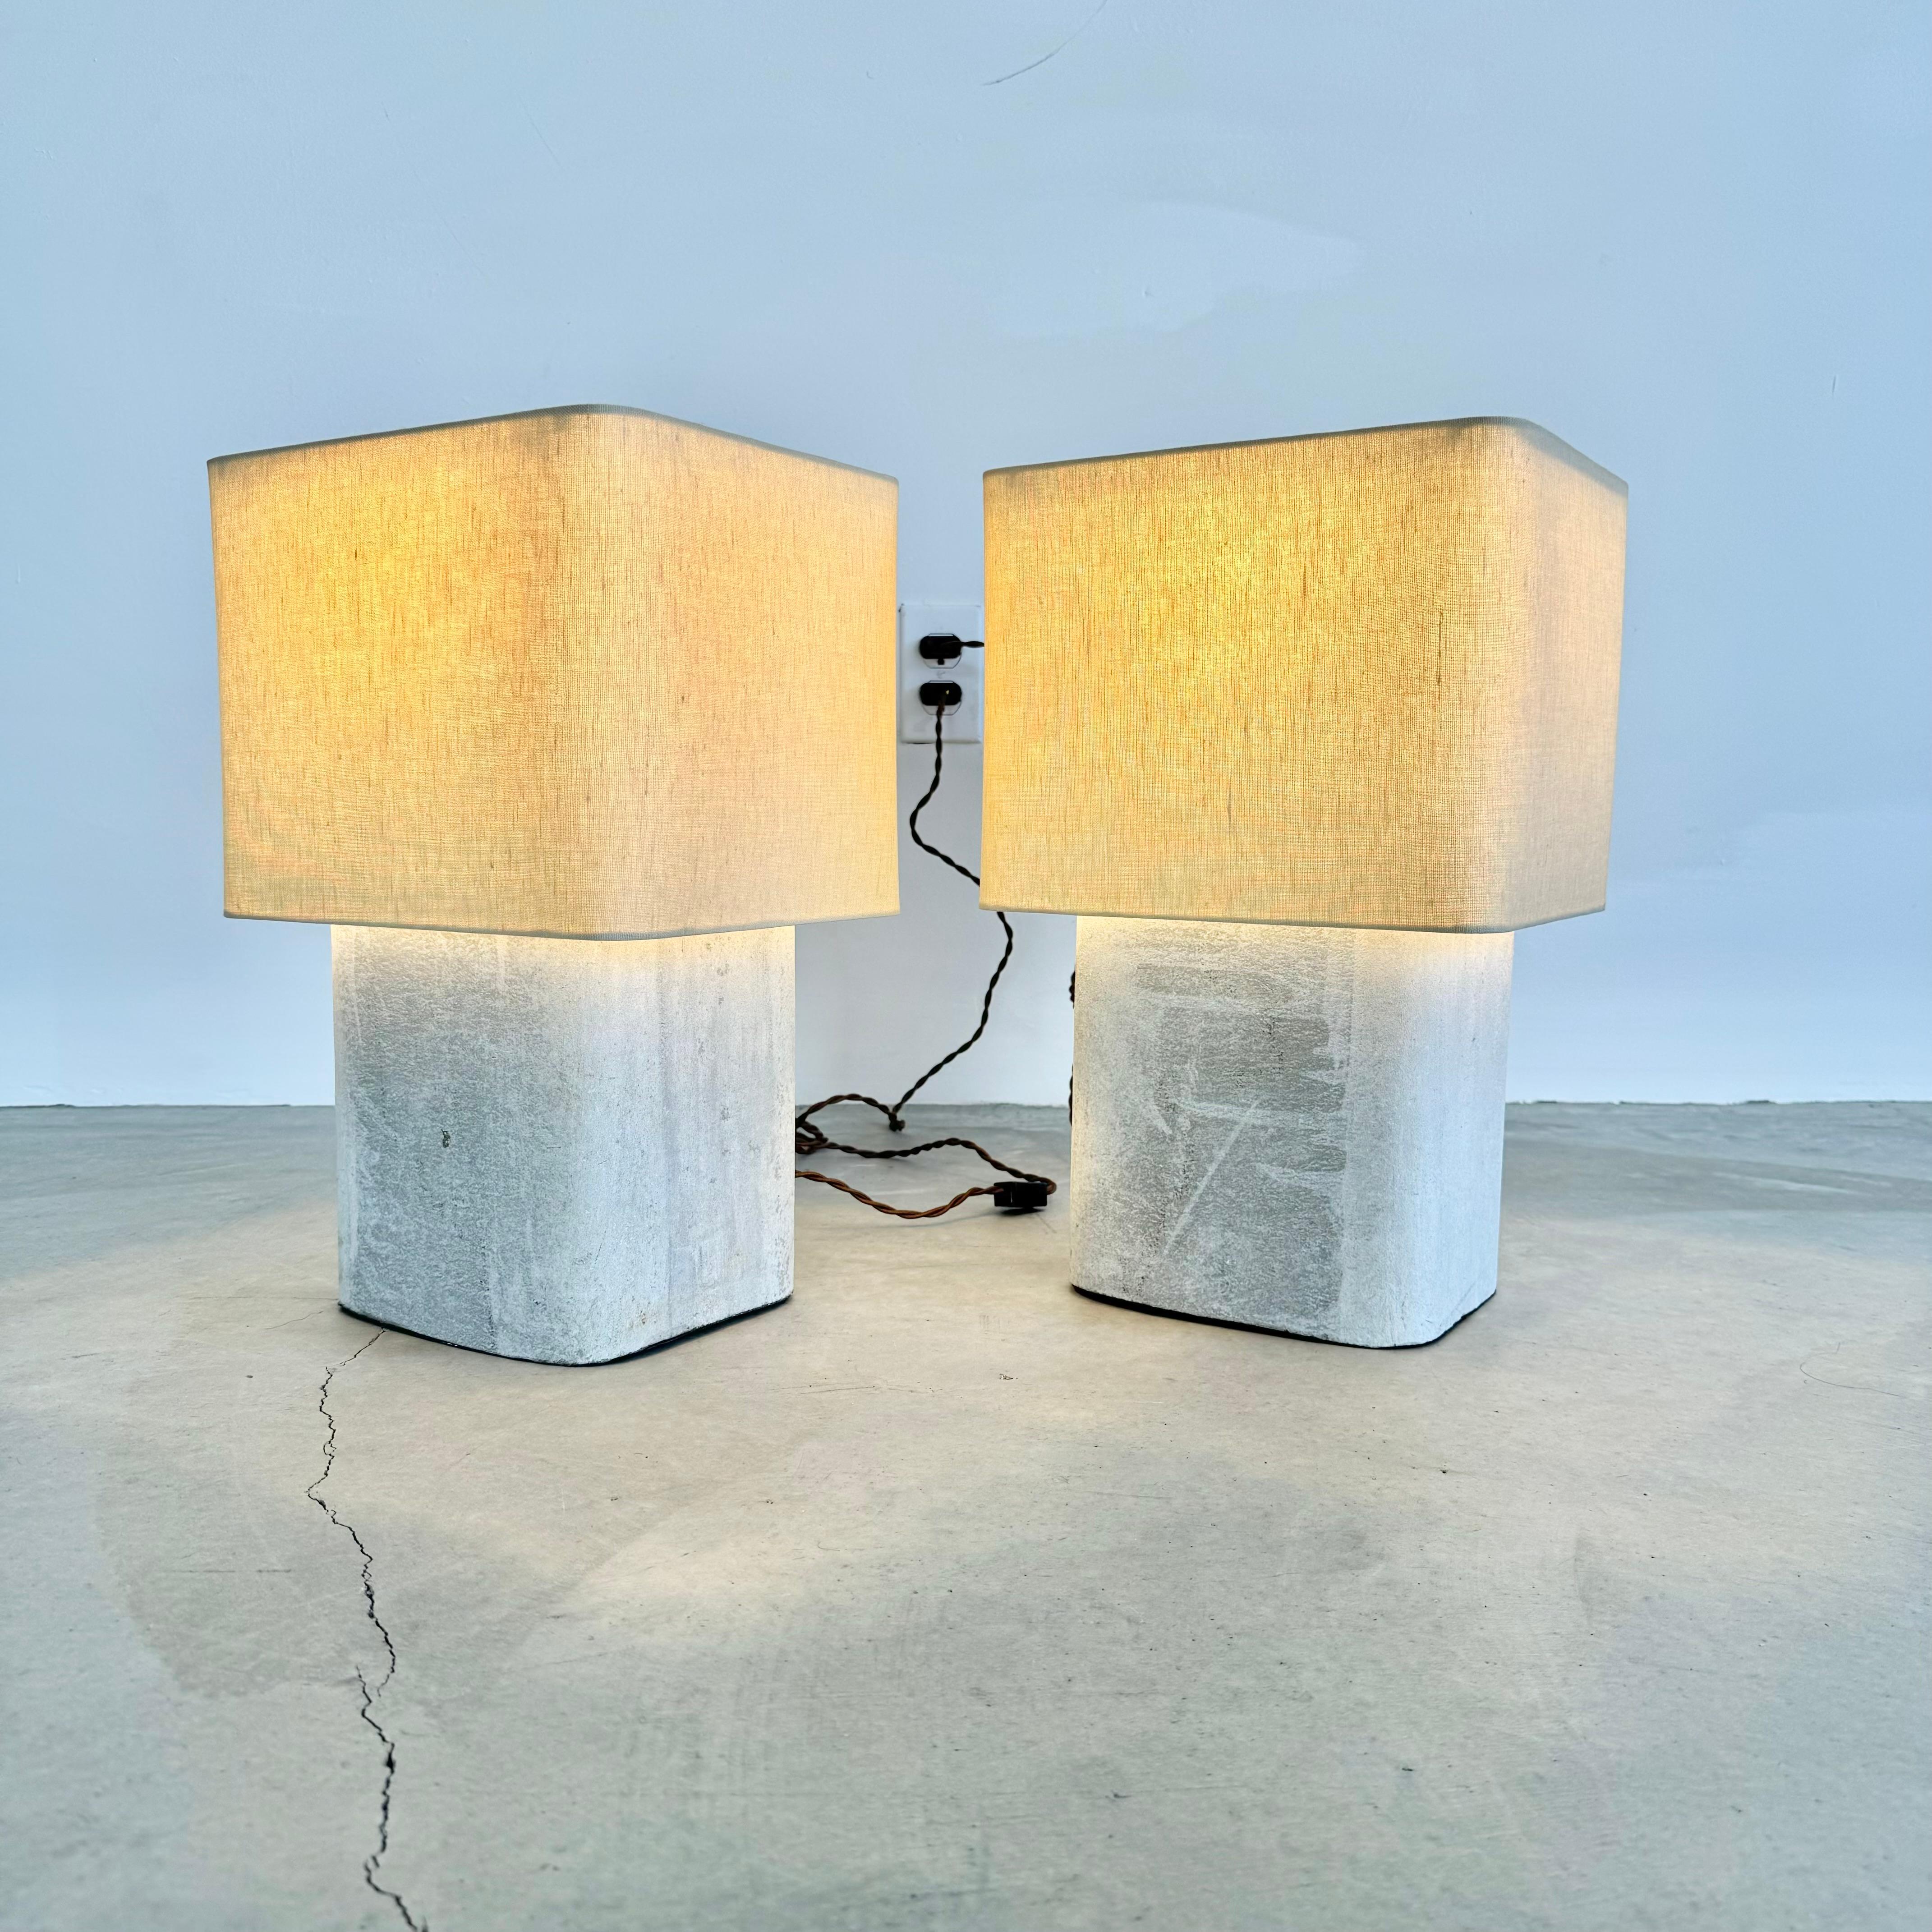 Pair of Willy Guhl Concrete Table Lamps, 1960s Switzerland For Sale 8